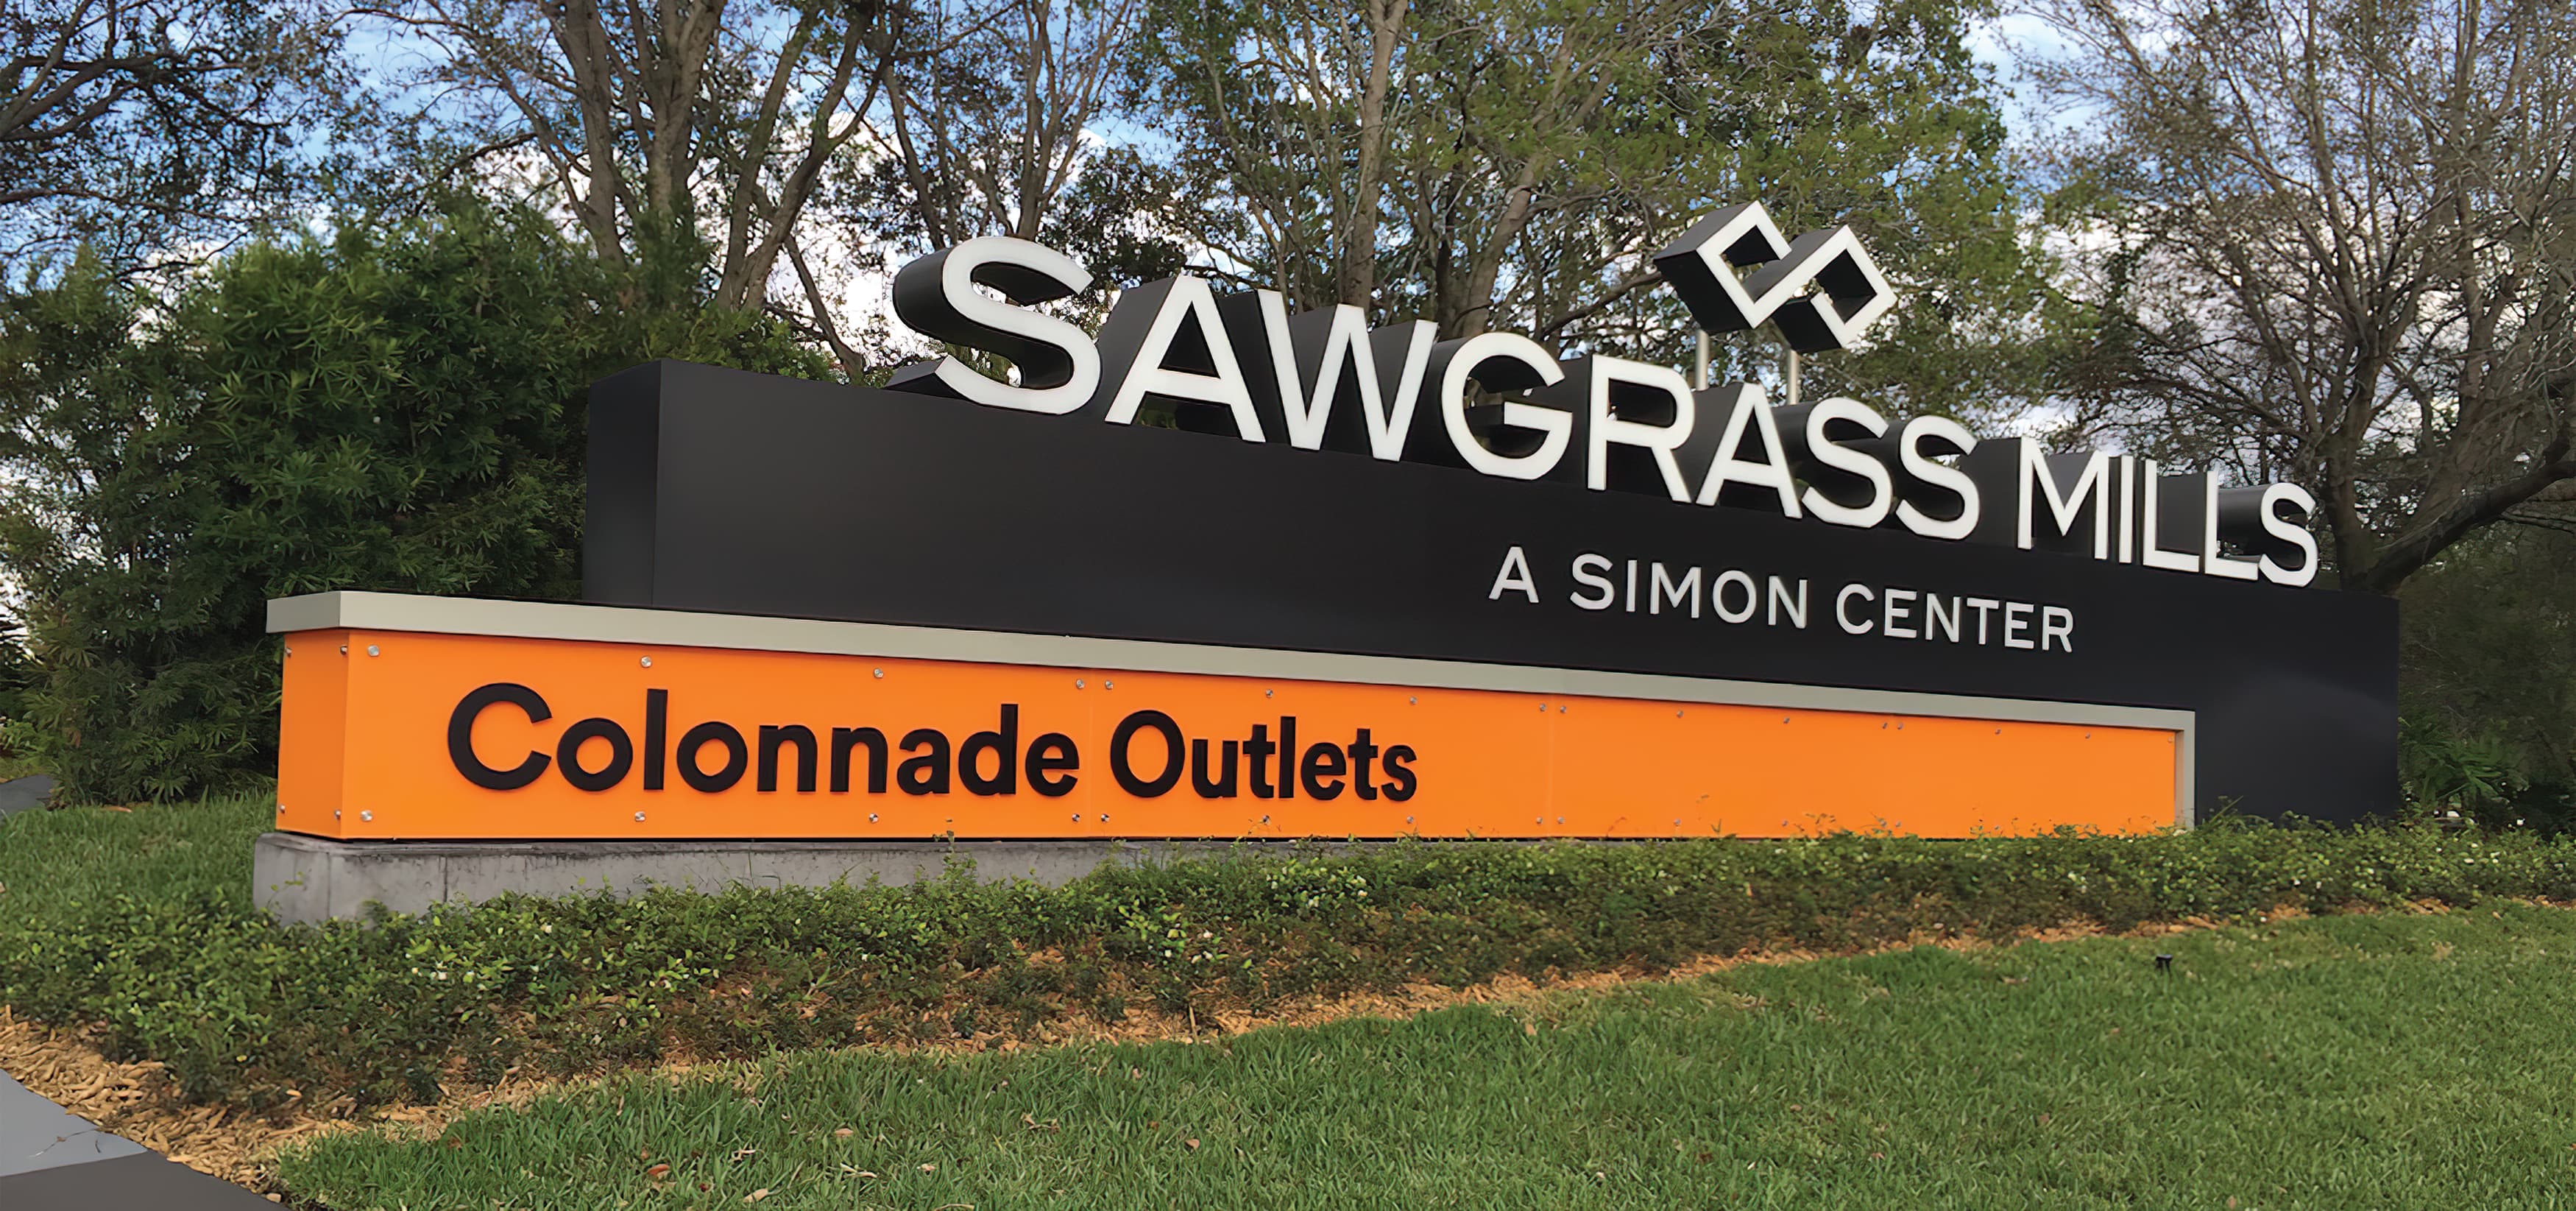 RSM Design worked to develop wayfinding signage, environmental graphics, and placemaking elements for Sawgrass Mills, a Simon Center located in Sunrise, Florida. Project Identity Monument.